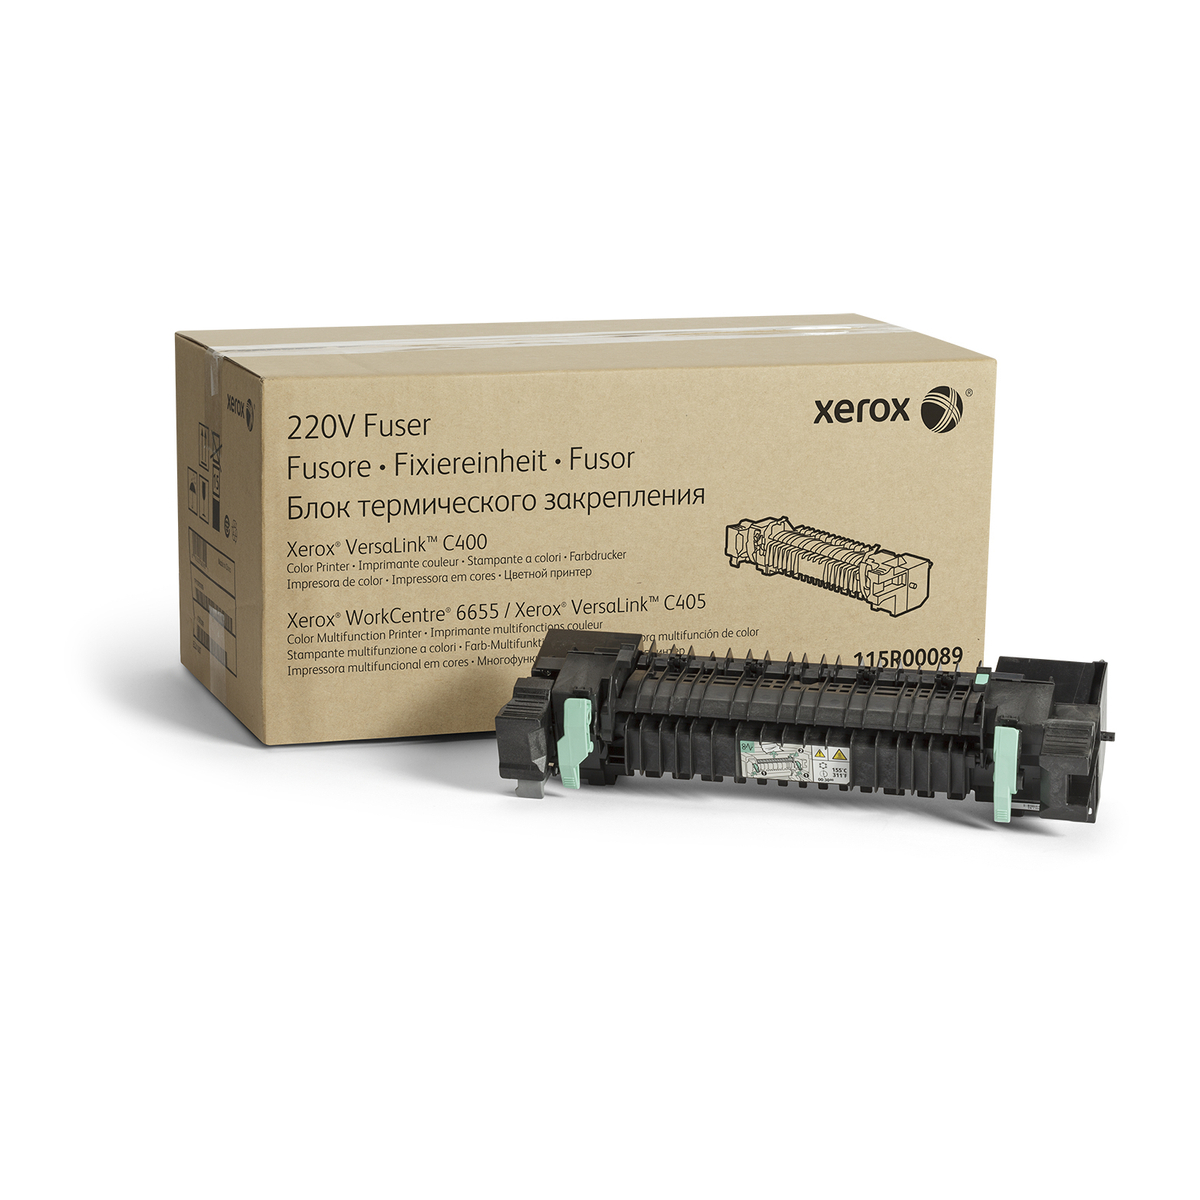 Xerox WC6655 Fuser Kit 100K Pages